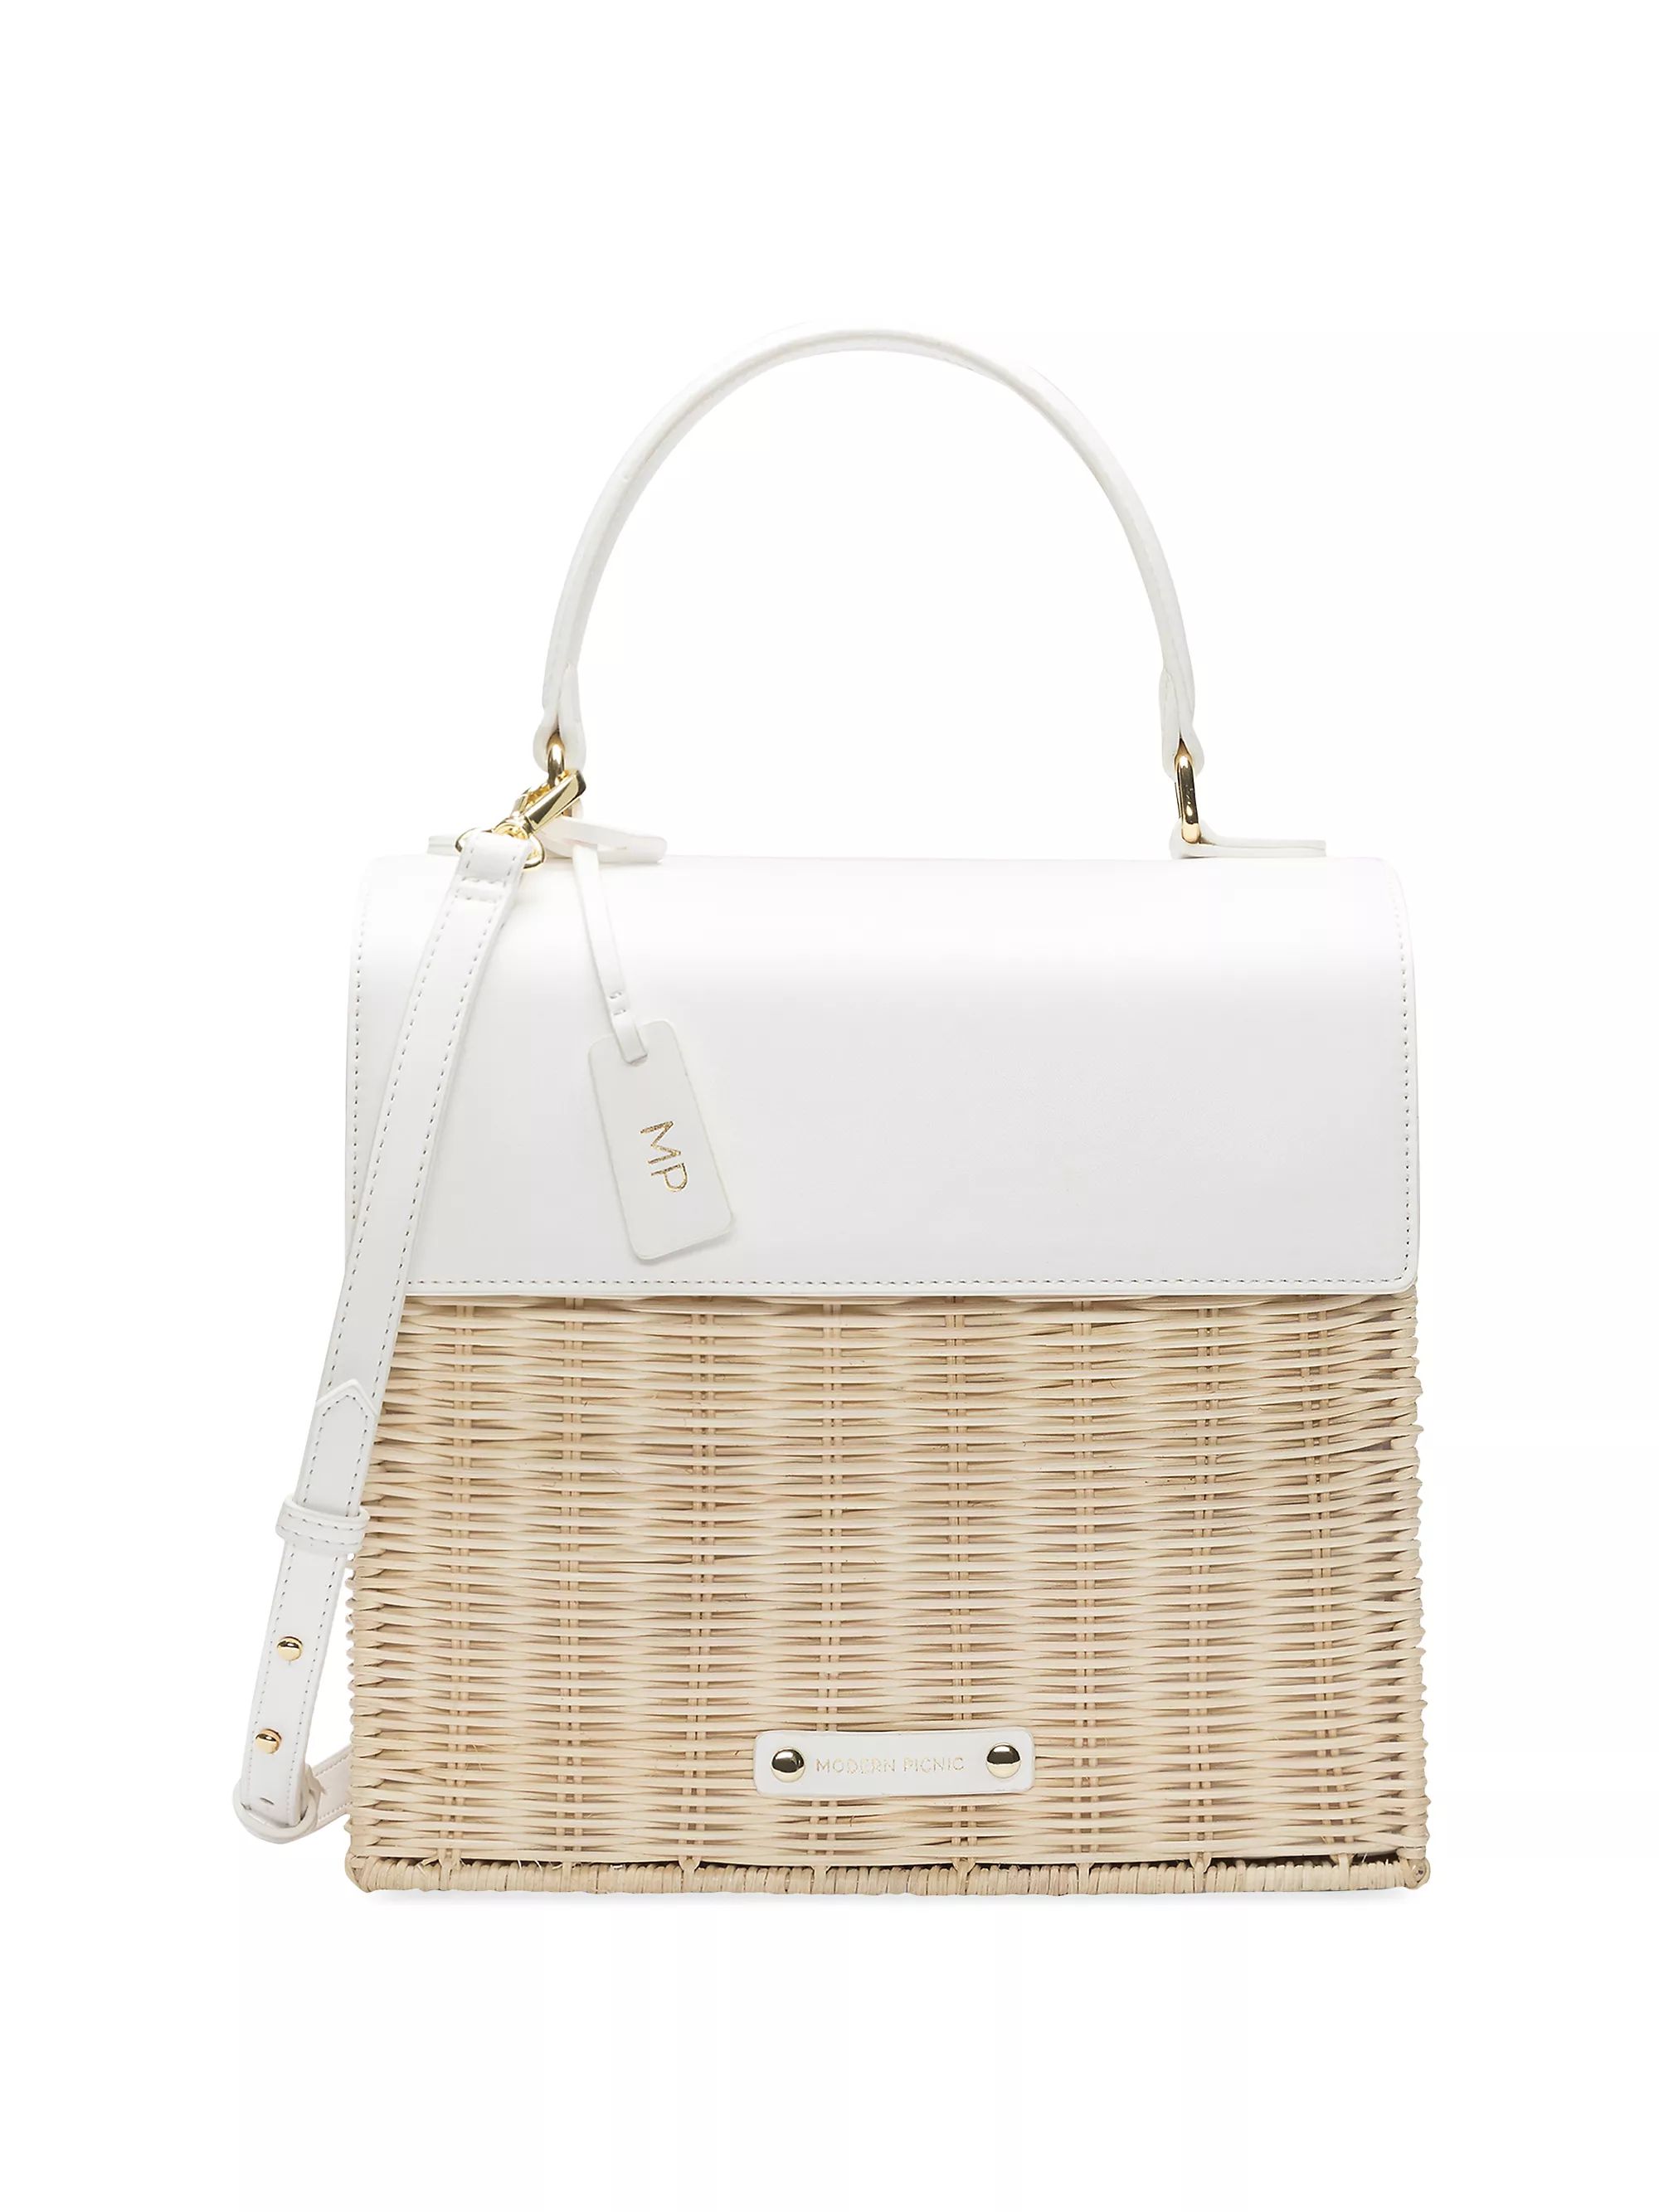 The Luncher Wicker & Vegan Leather Bag | Saks Fifth Avenue